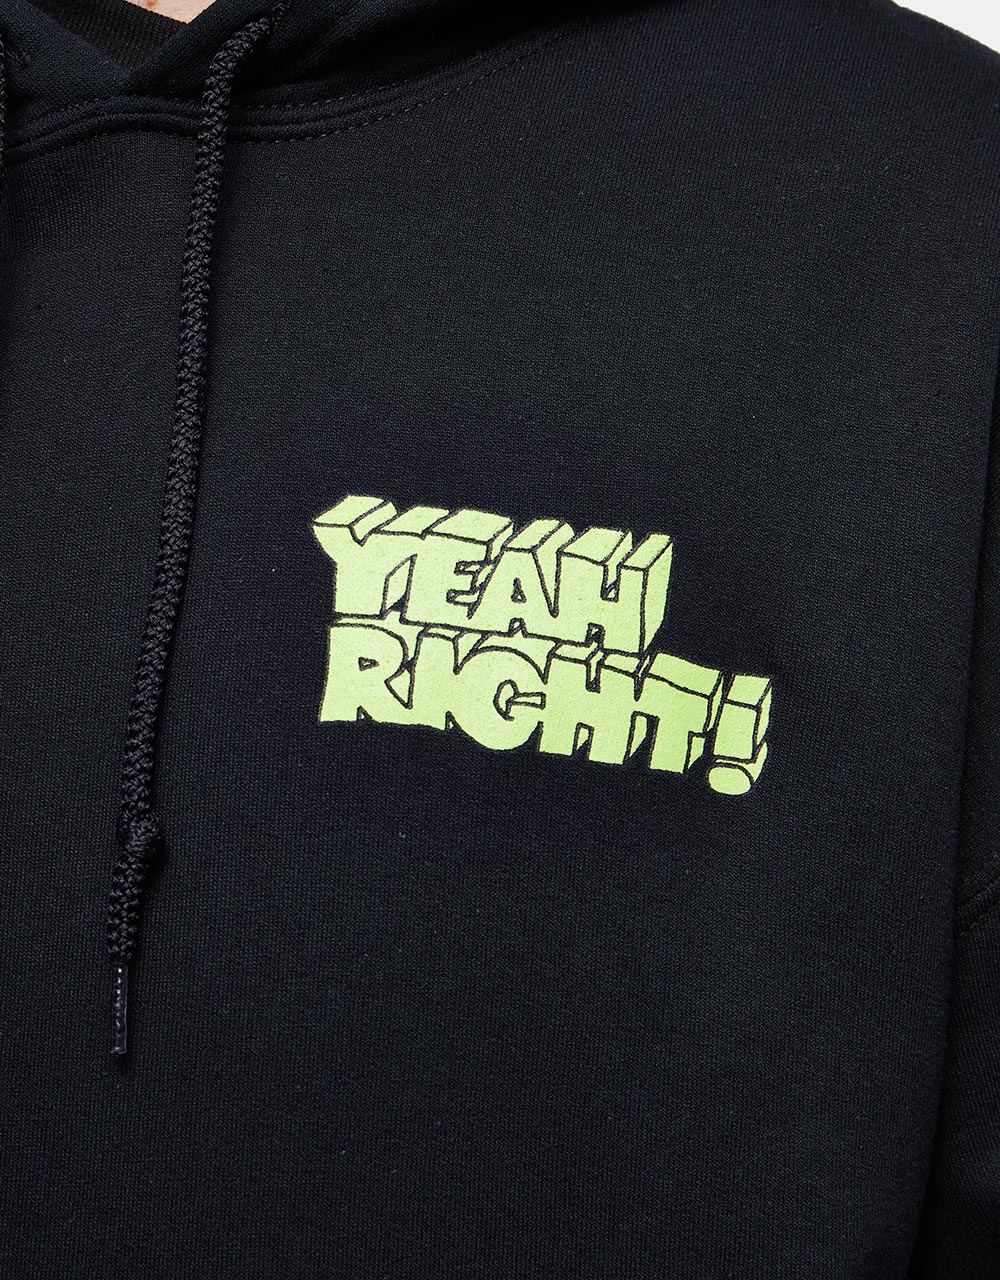 Girl Yeah Right! 20 Year Pullover Hoodie - Black